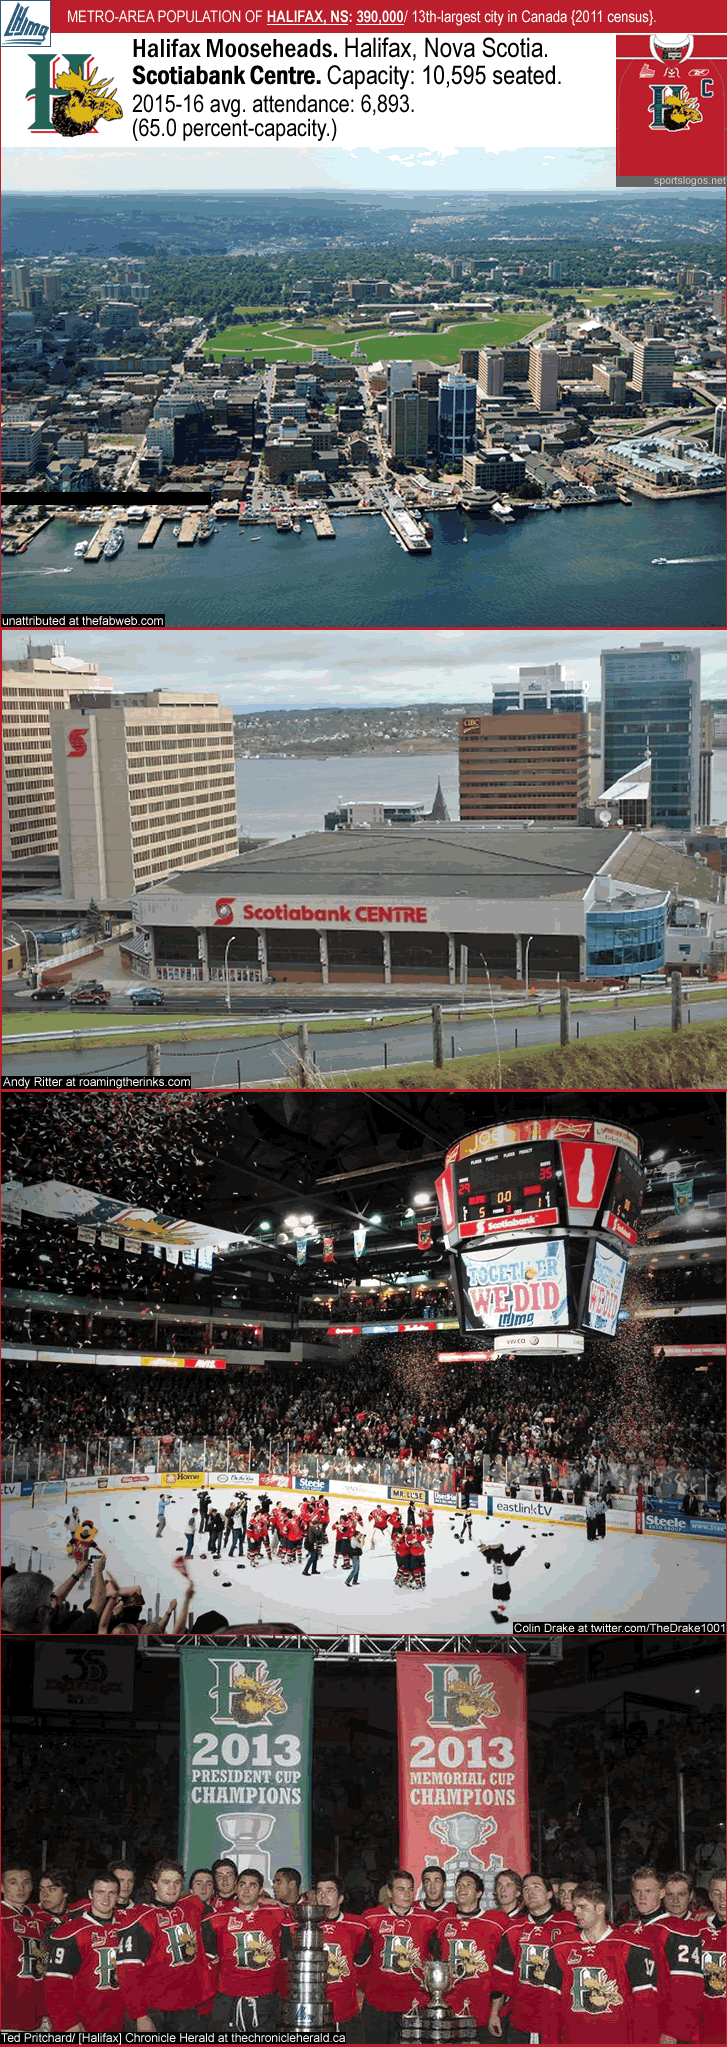 halifax-mooseheads_scotiabank-centre_2013-chl-memorial-cup-champions_b_.gif